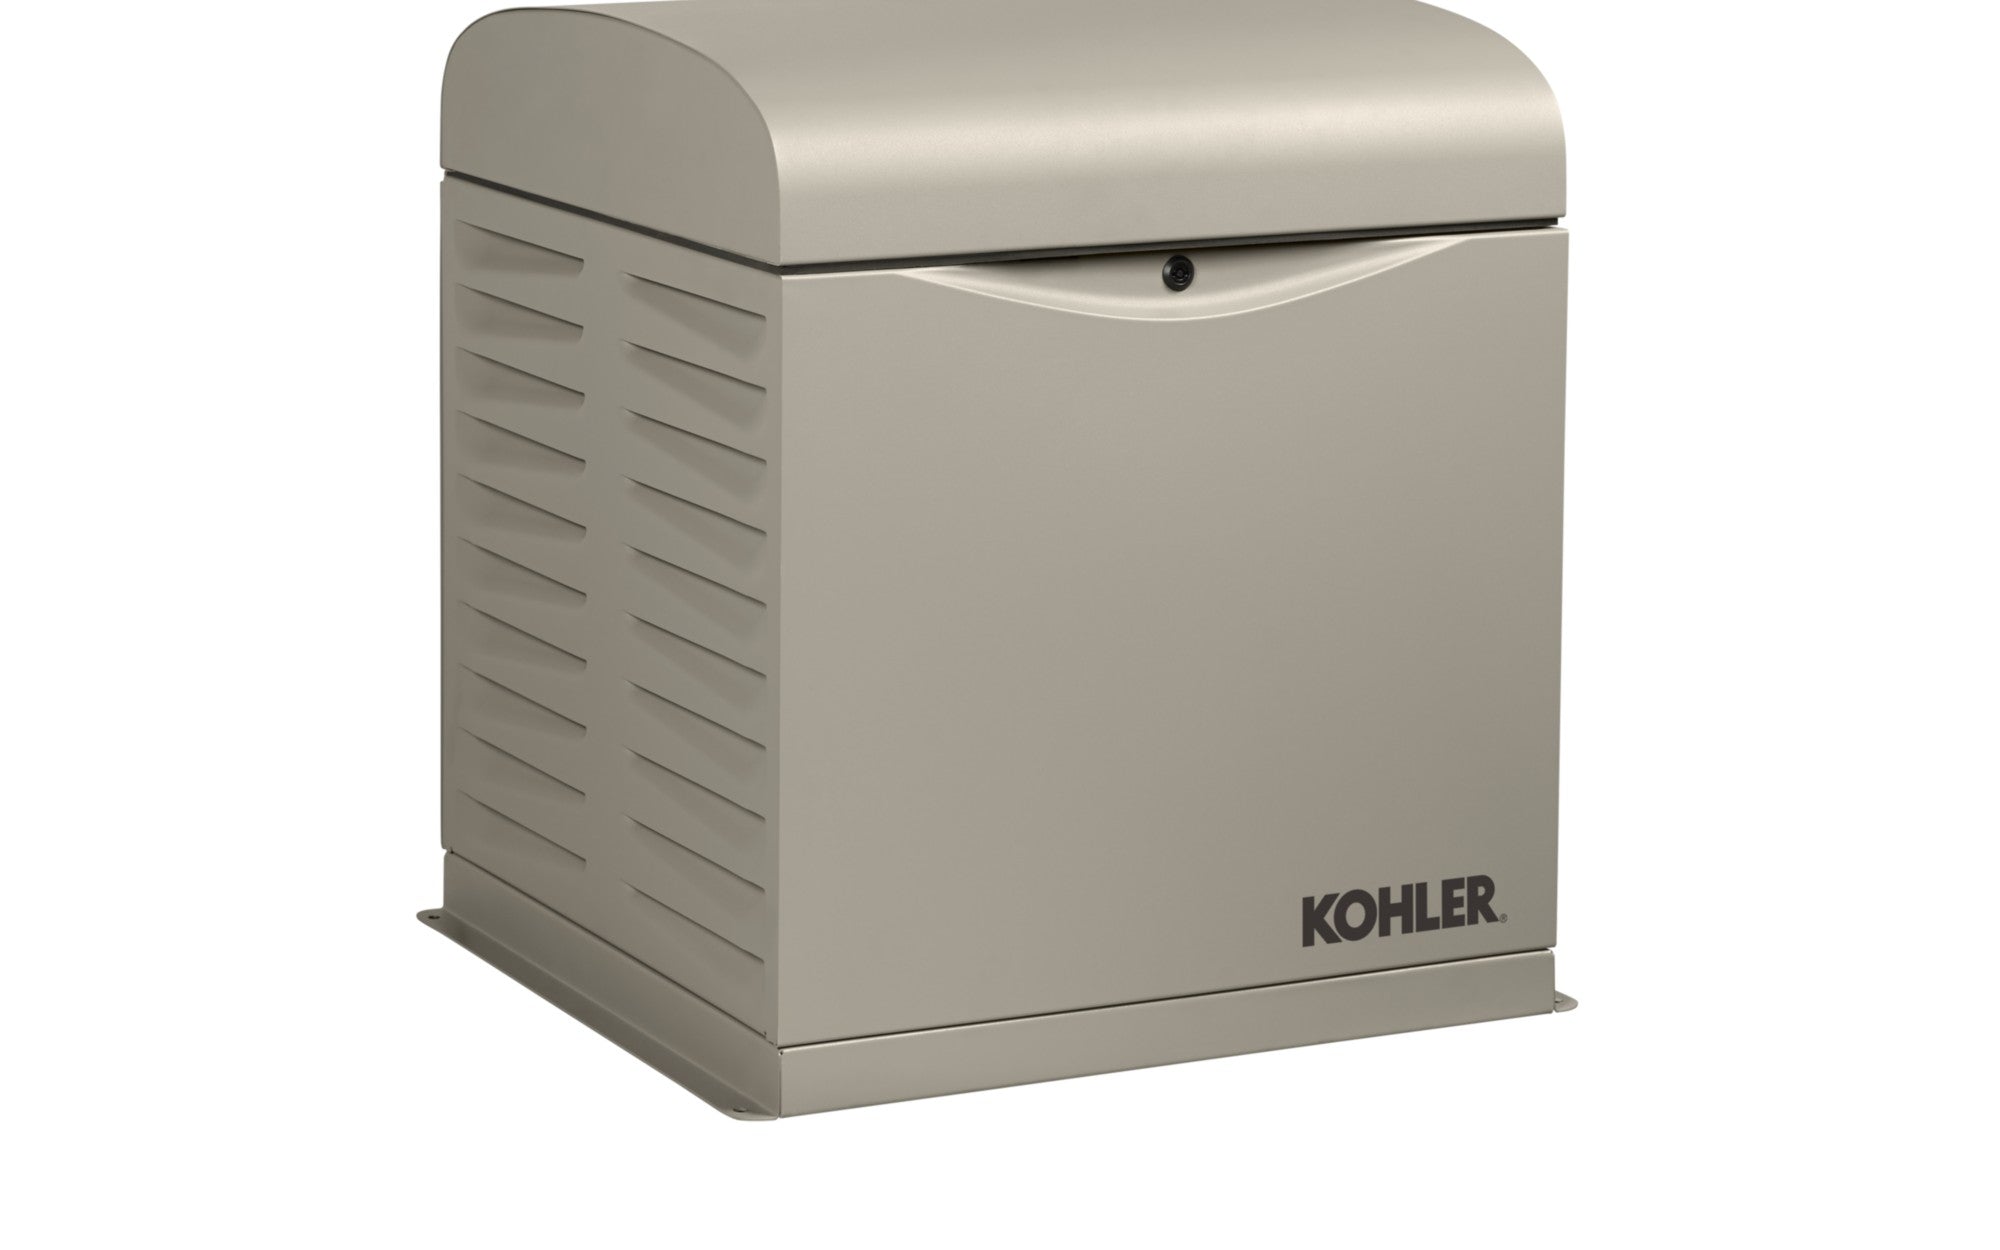 Kohler 12RESVL-100LC12 Air-Cooled Standby Generator with 100 Amp 12-Circuit Transfer Switch Single Phase, 12,000-Watt